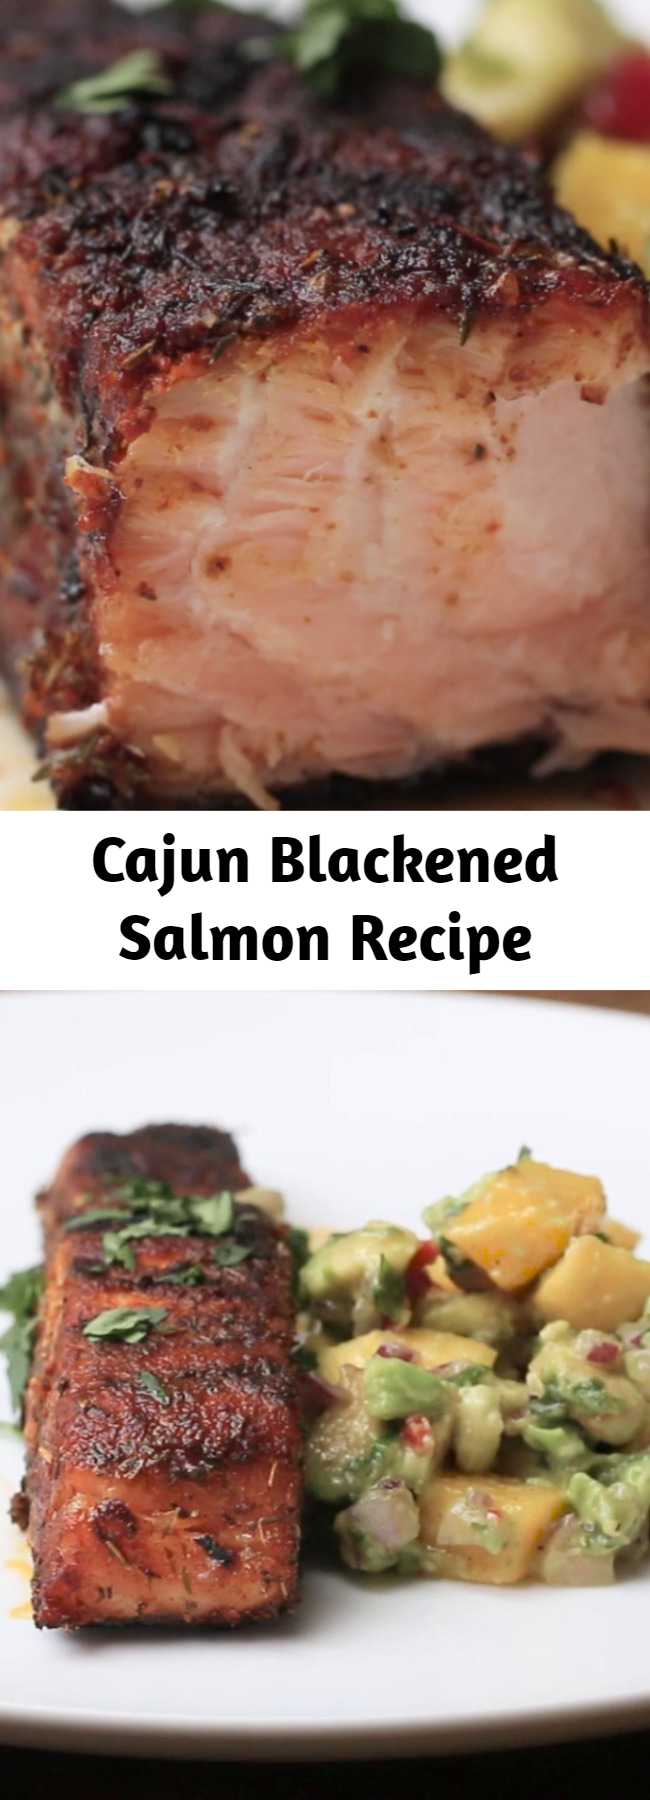 Cajun Blackened Salmon Recipe - Great! I really loved both the salmon and the salsa.